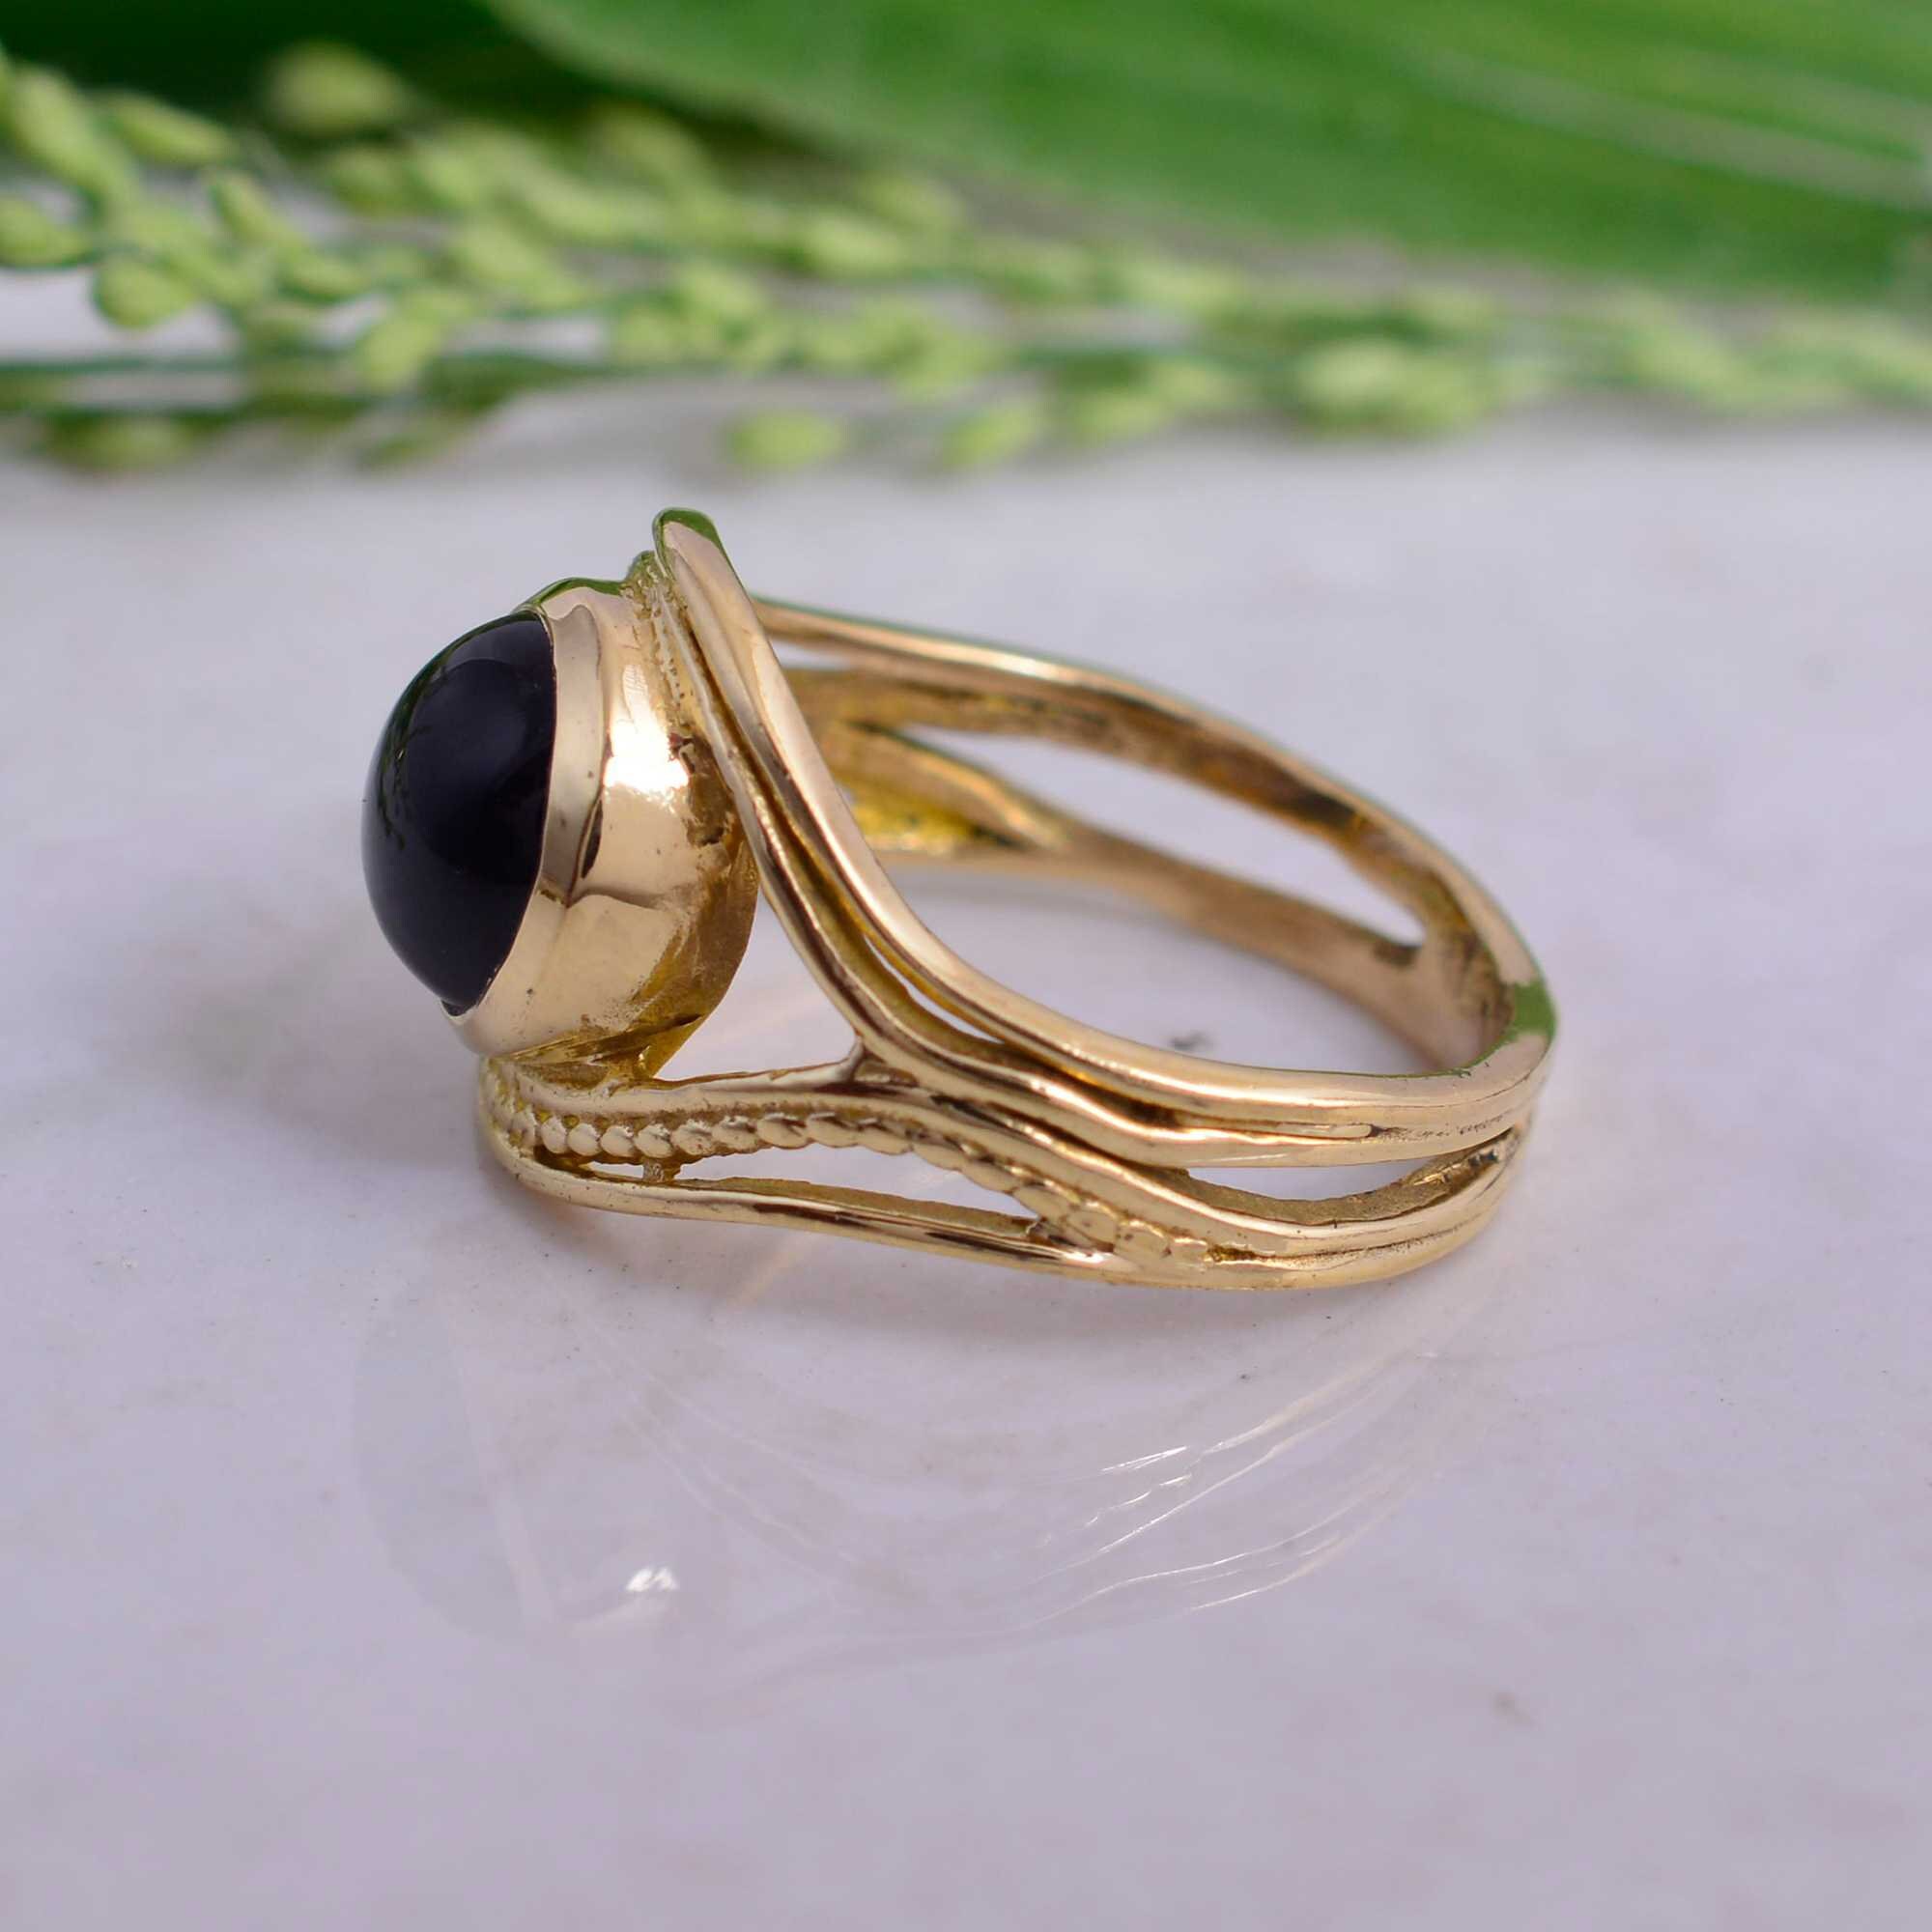 Gold Colour 2022 New Black Stone Ring Stainless Steel Fashion Men Women Ring  Fashion Words Jewelry Wedding Gift